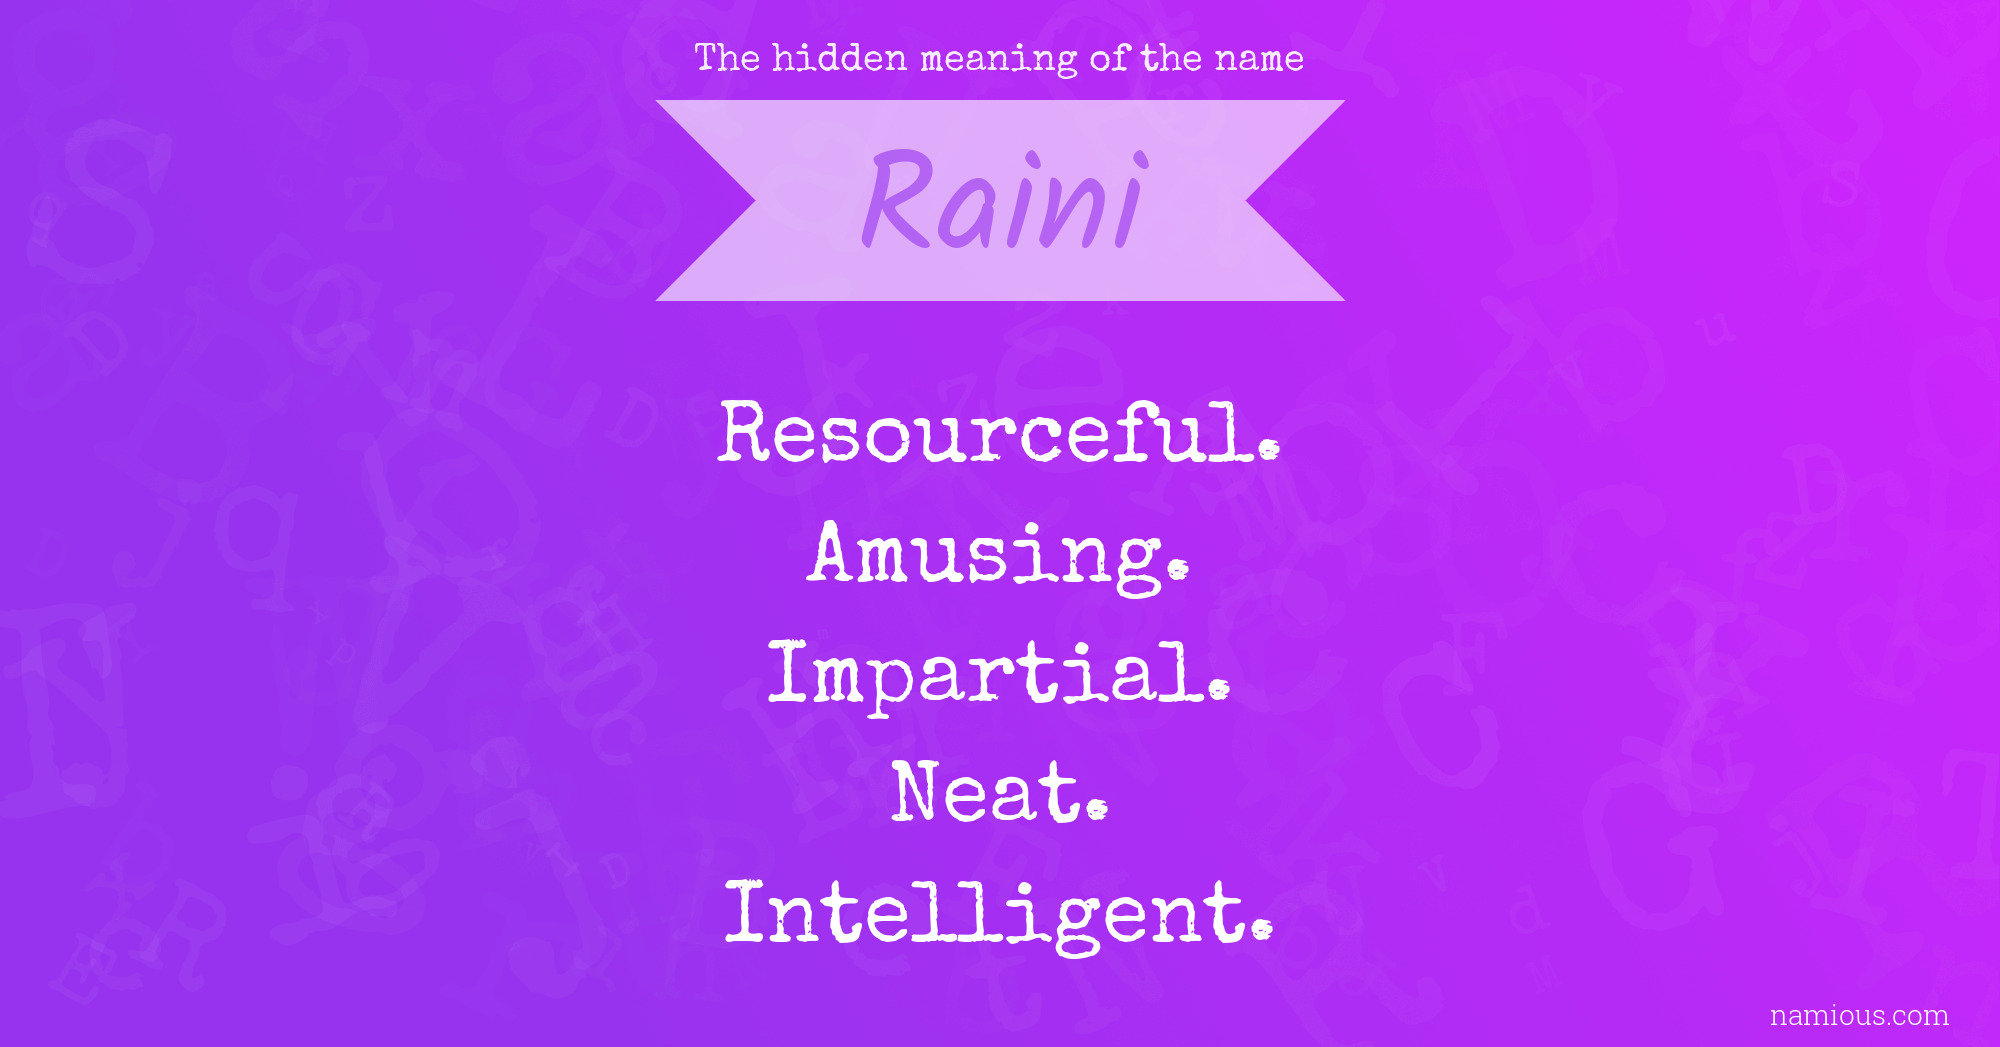 The hidden meaning of the name Raini